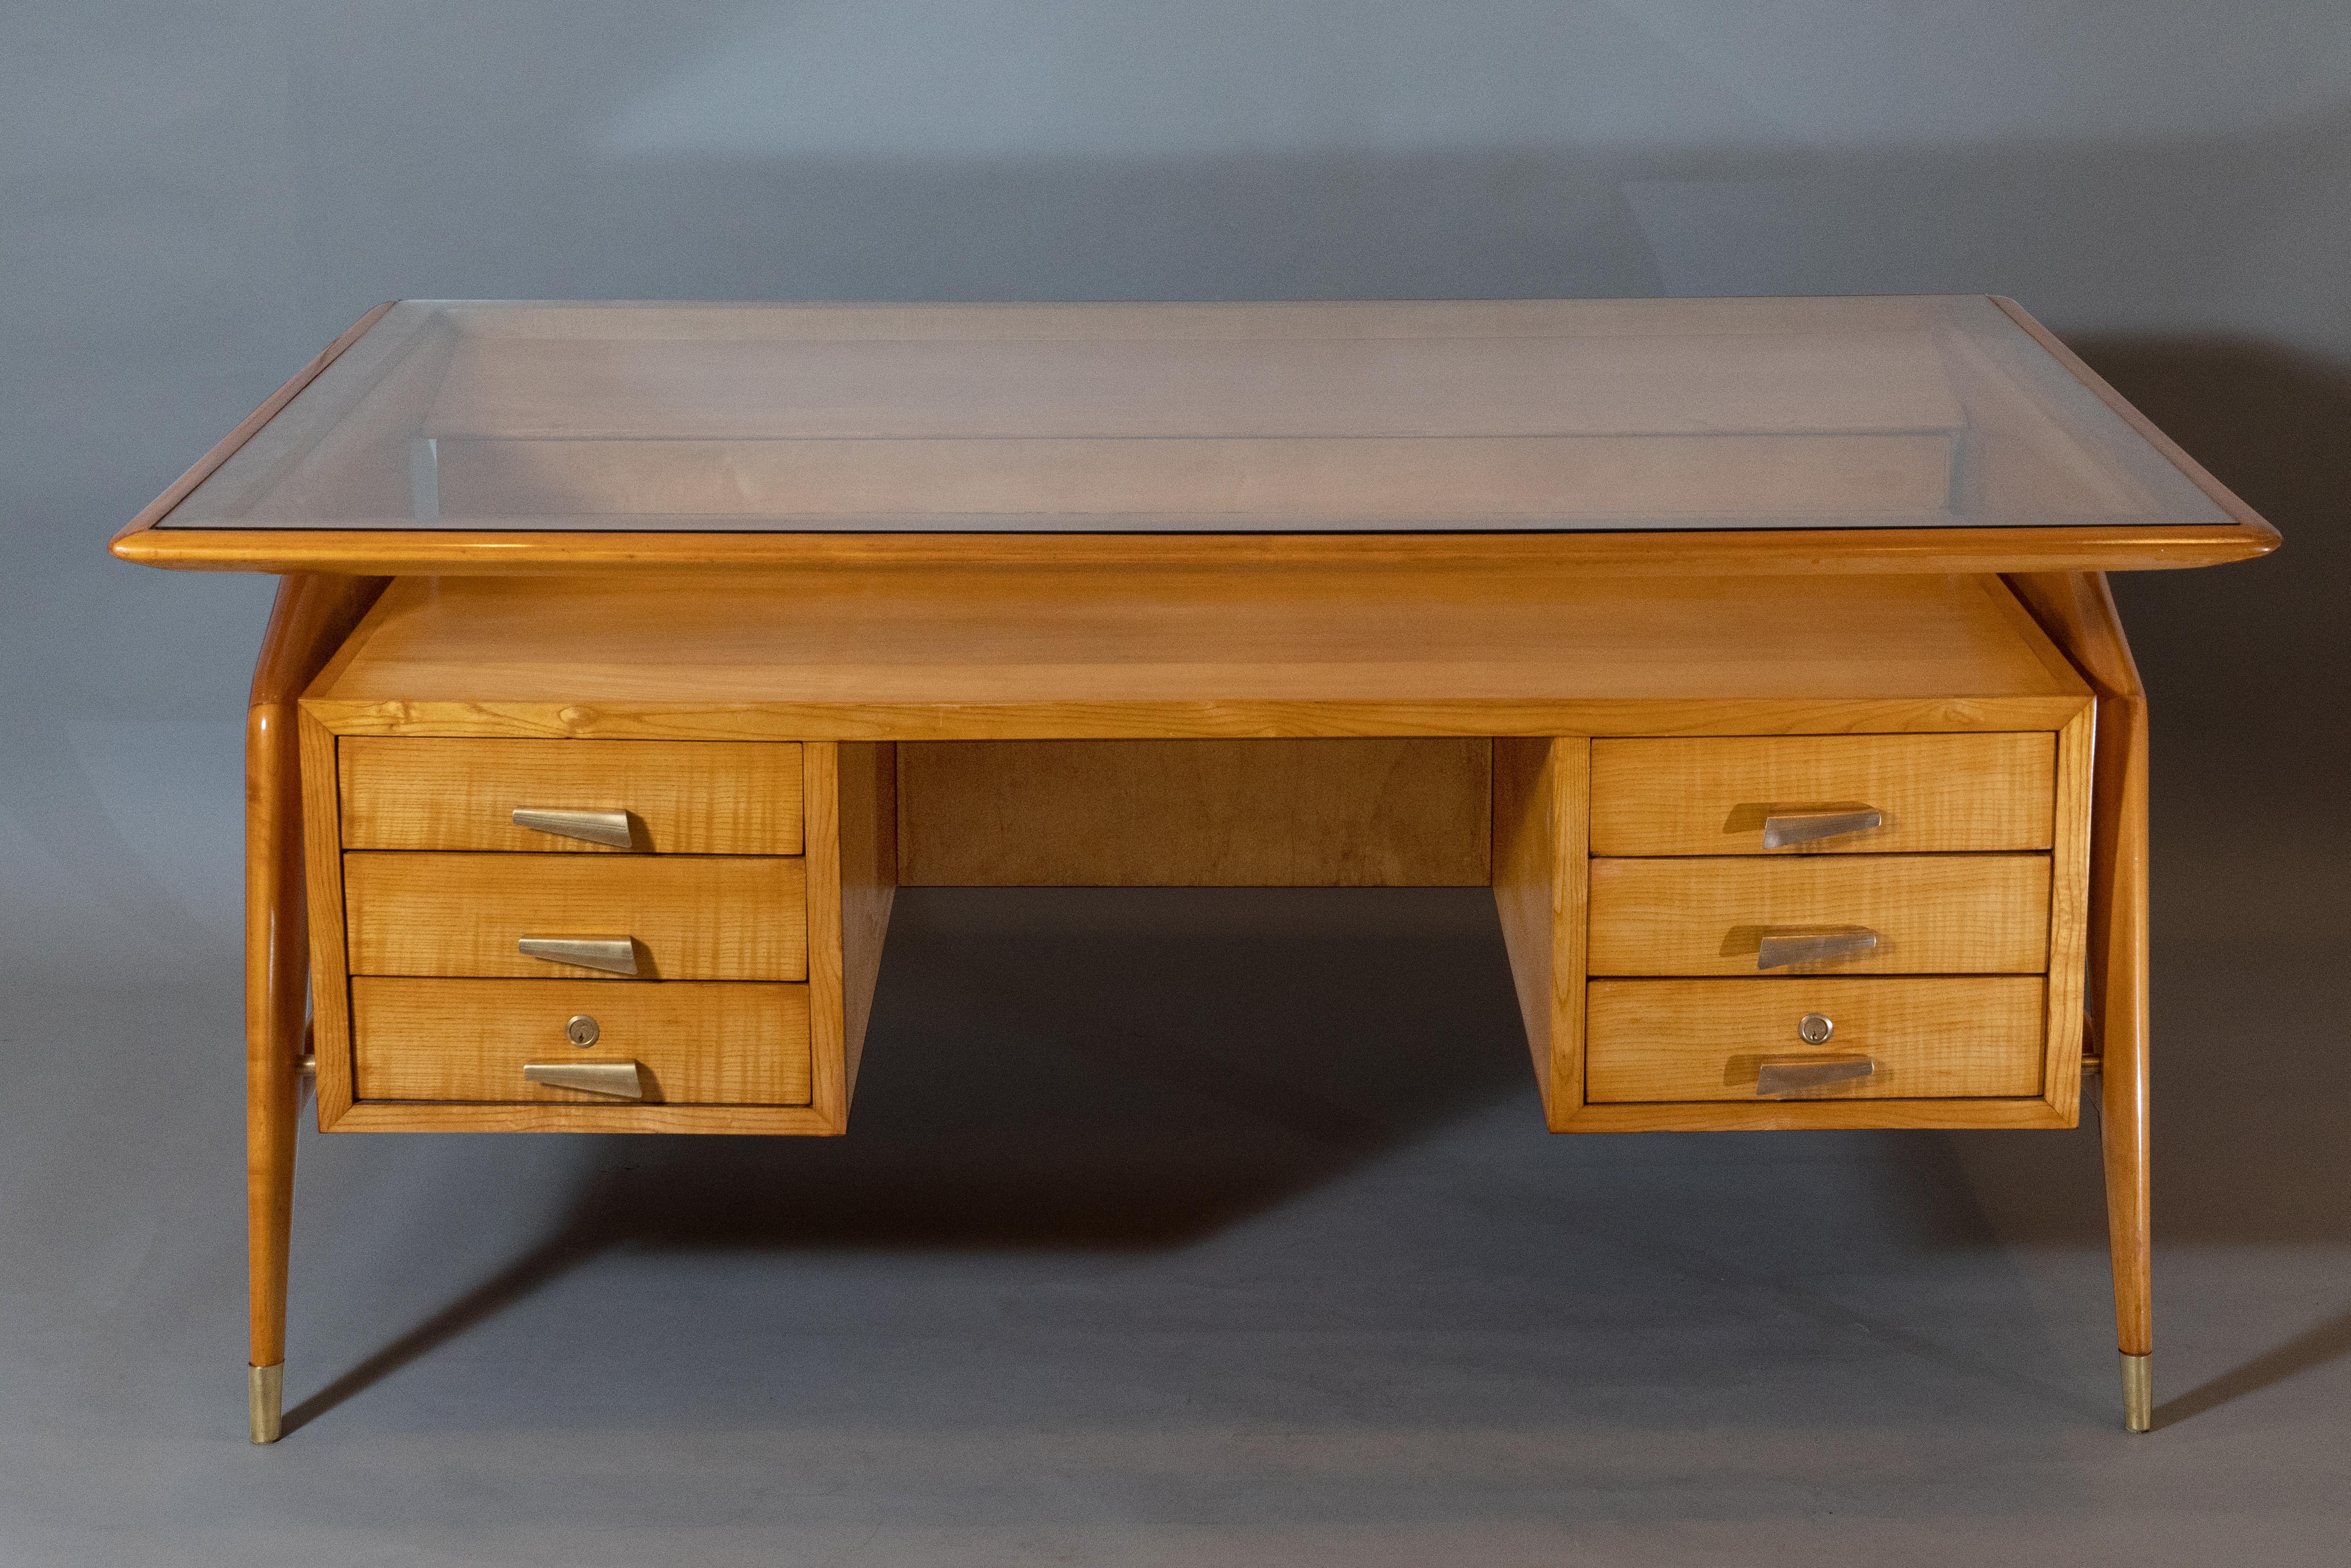 Carlo di Carli: Desk in Fruitwood, Brass, and Glass, Italy 1950s In Good Condition For Sale In New York, NY